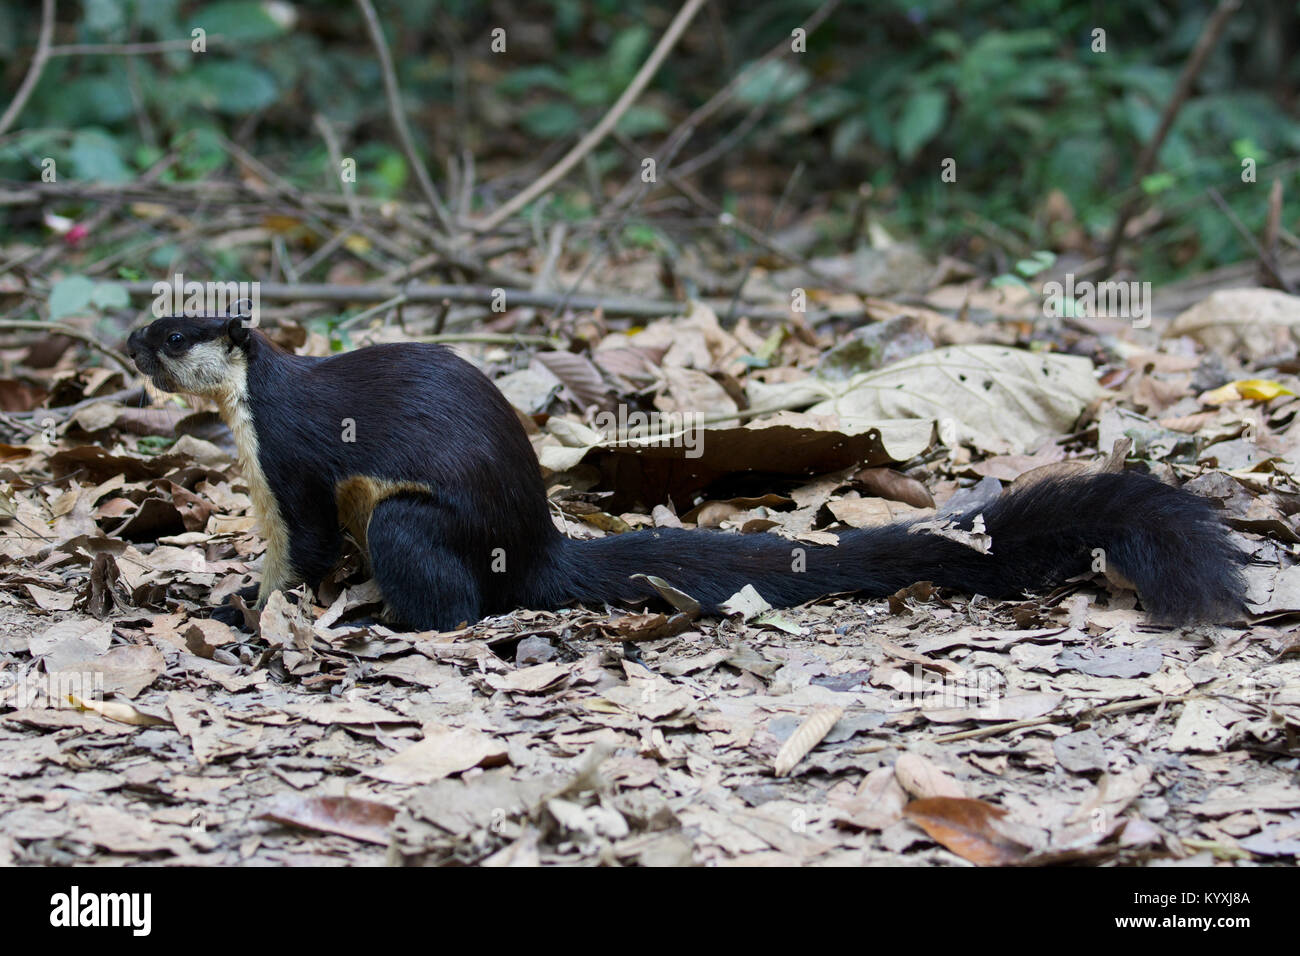 The black giant squirrel (or Malayan giant squirrel) (Ratufa bicolor) is a large tree squirrel in the genus Ratufa native to Indomalaya. R. bicolor is Stock Photo